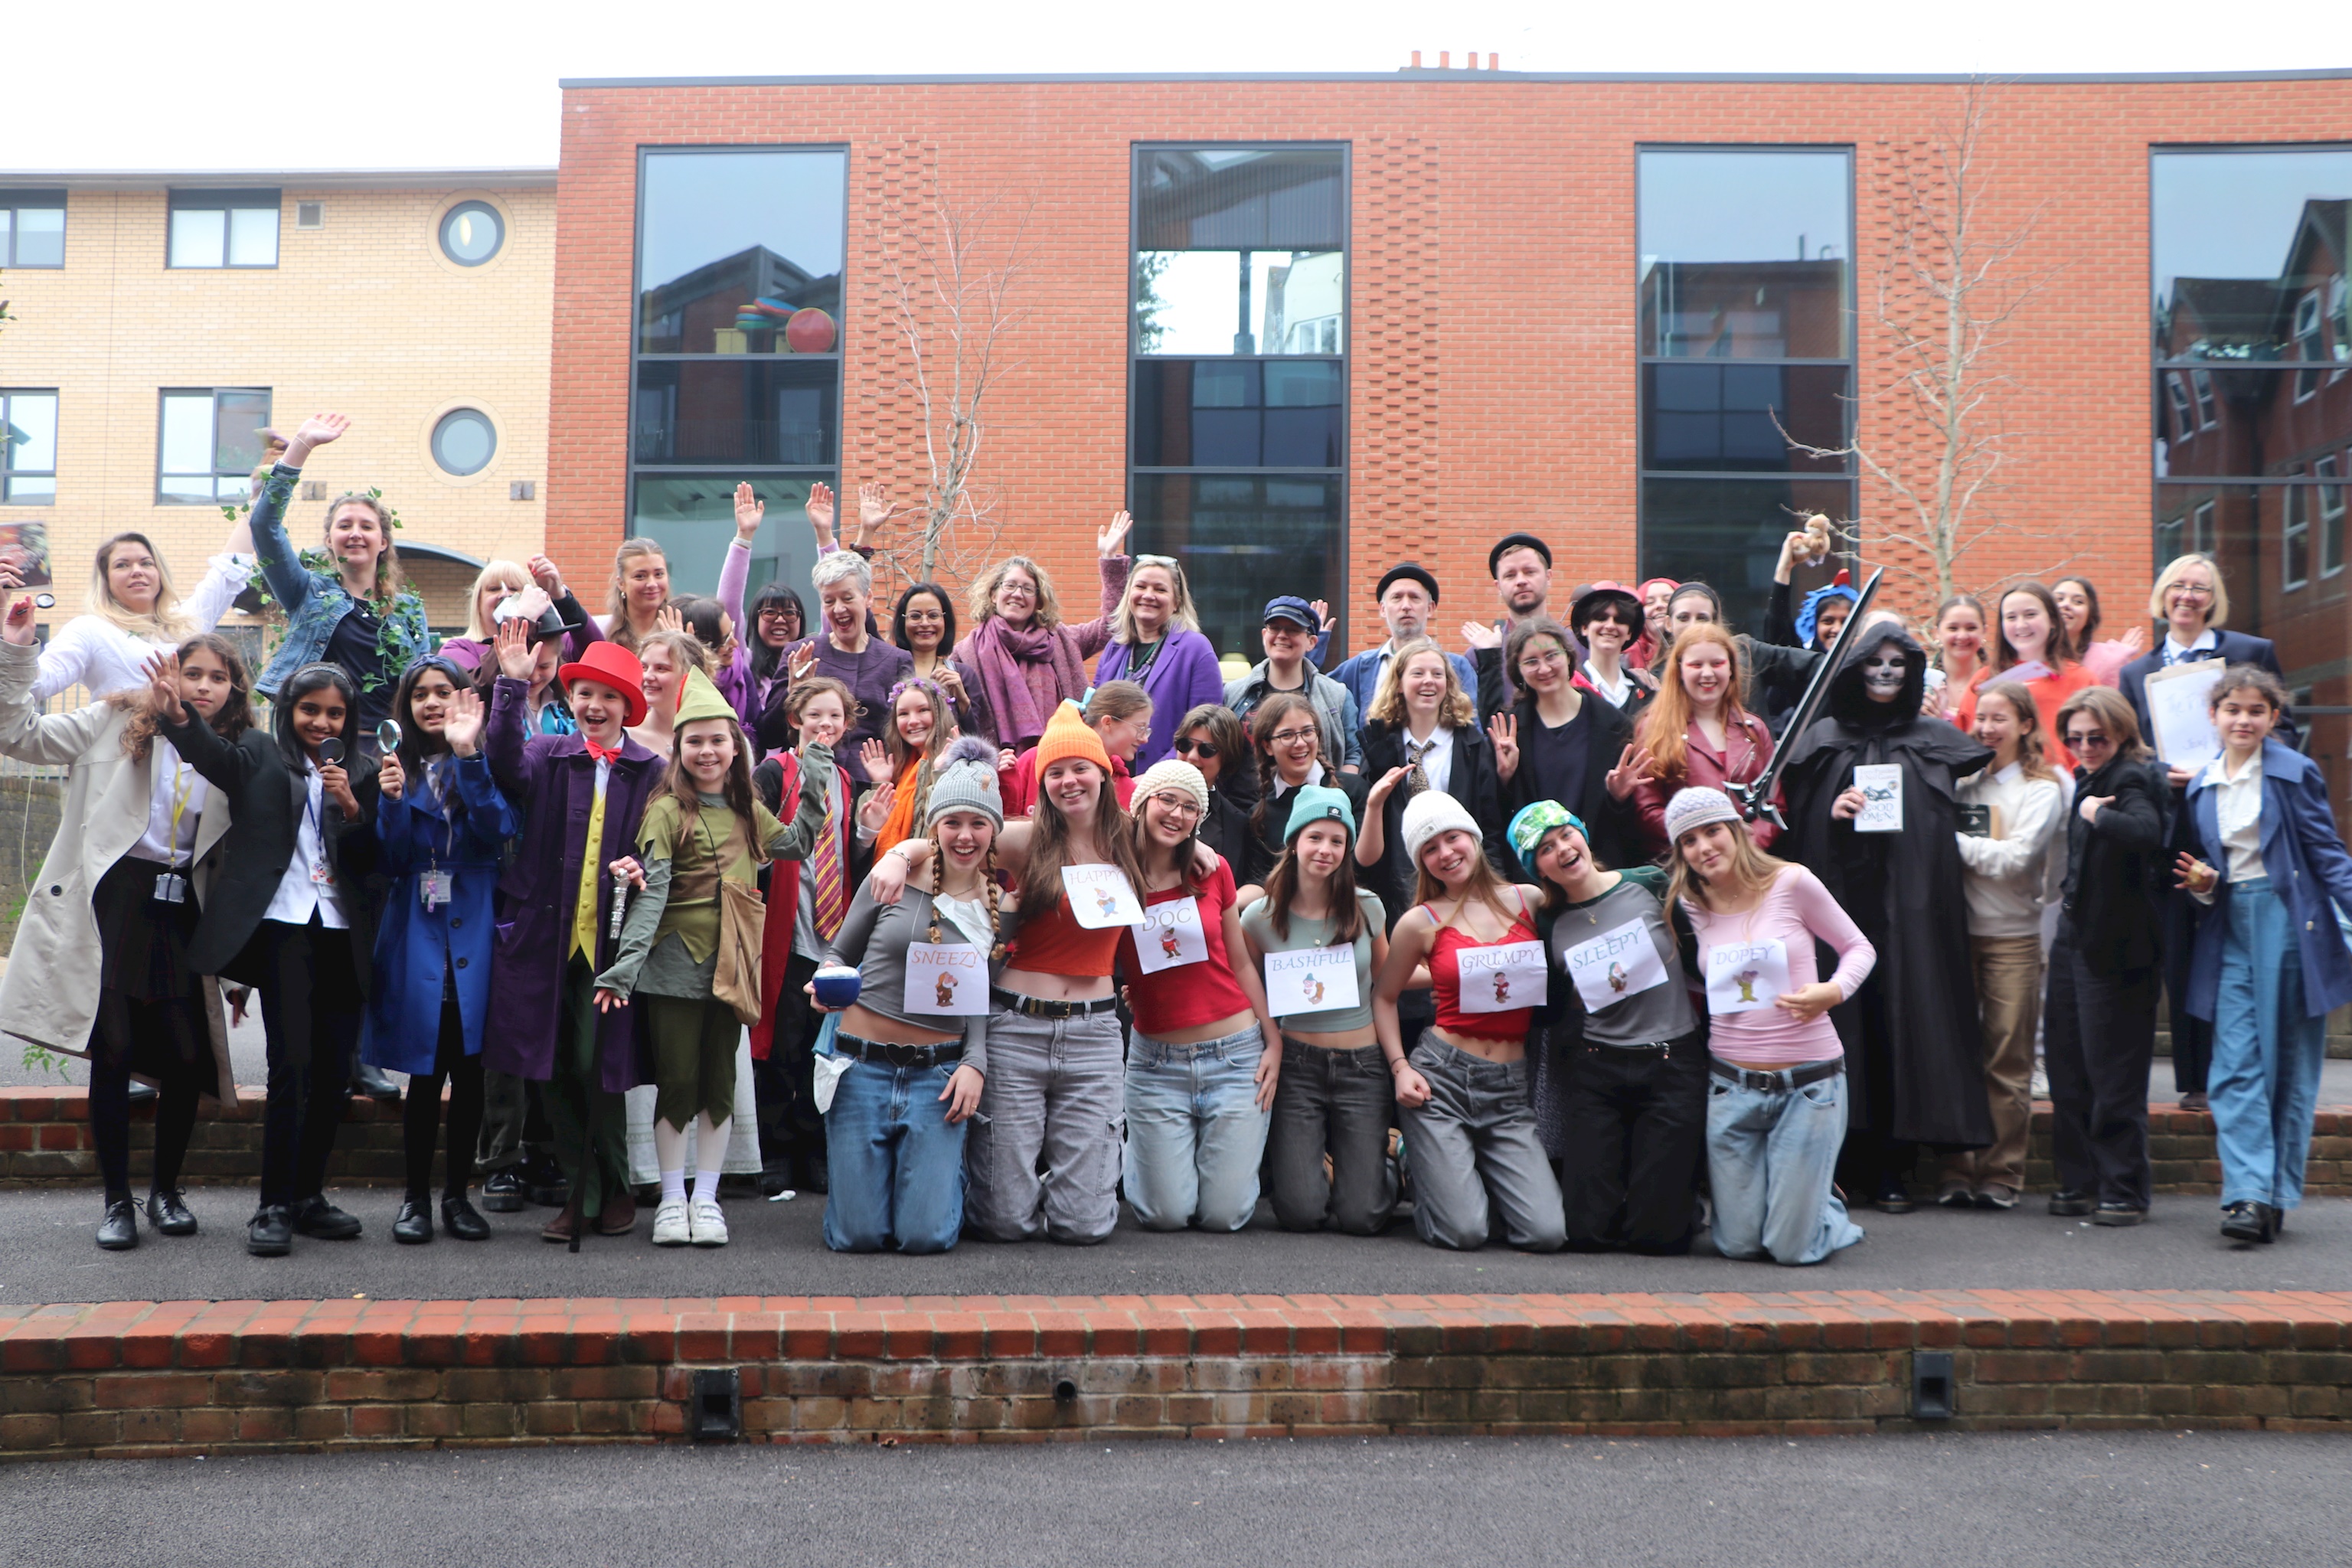 A group photograph of senior school staff and students dressed as book characters for World Book Day